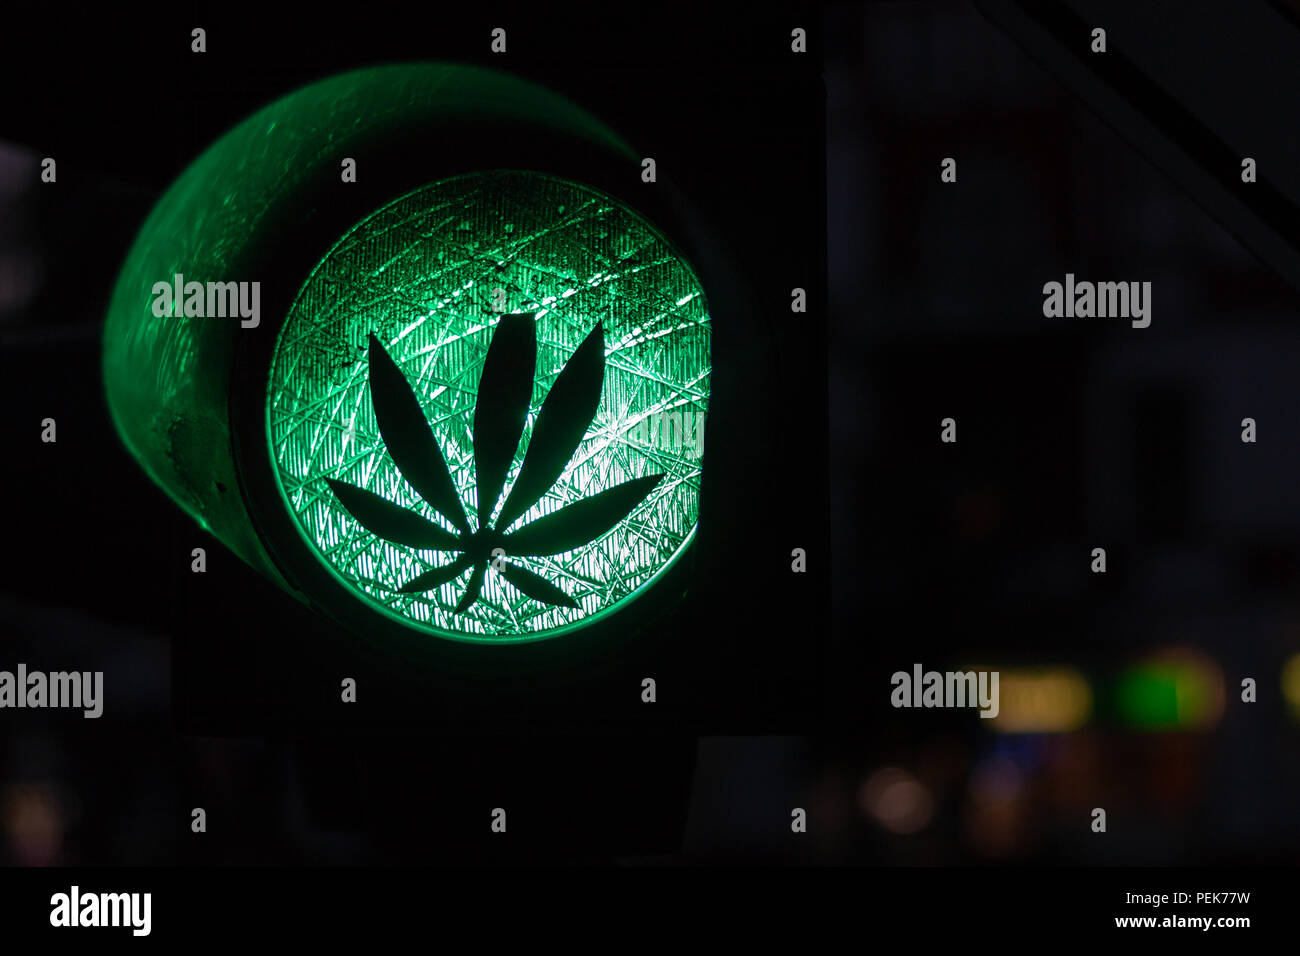 A sticker of a plant on a green traffic light as a symbol of the legalization of cannabis or marijuana Stock Photo